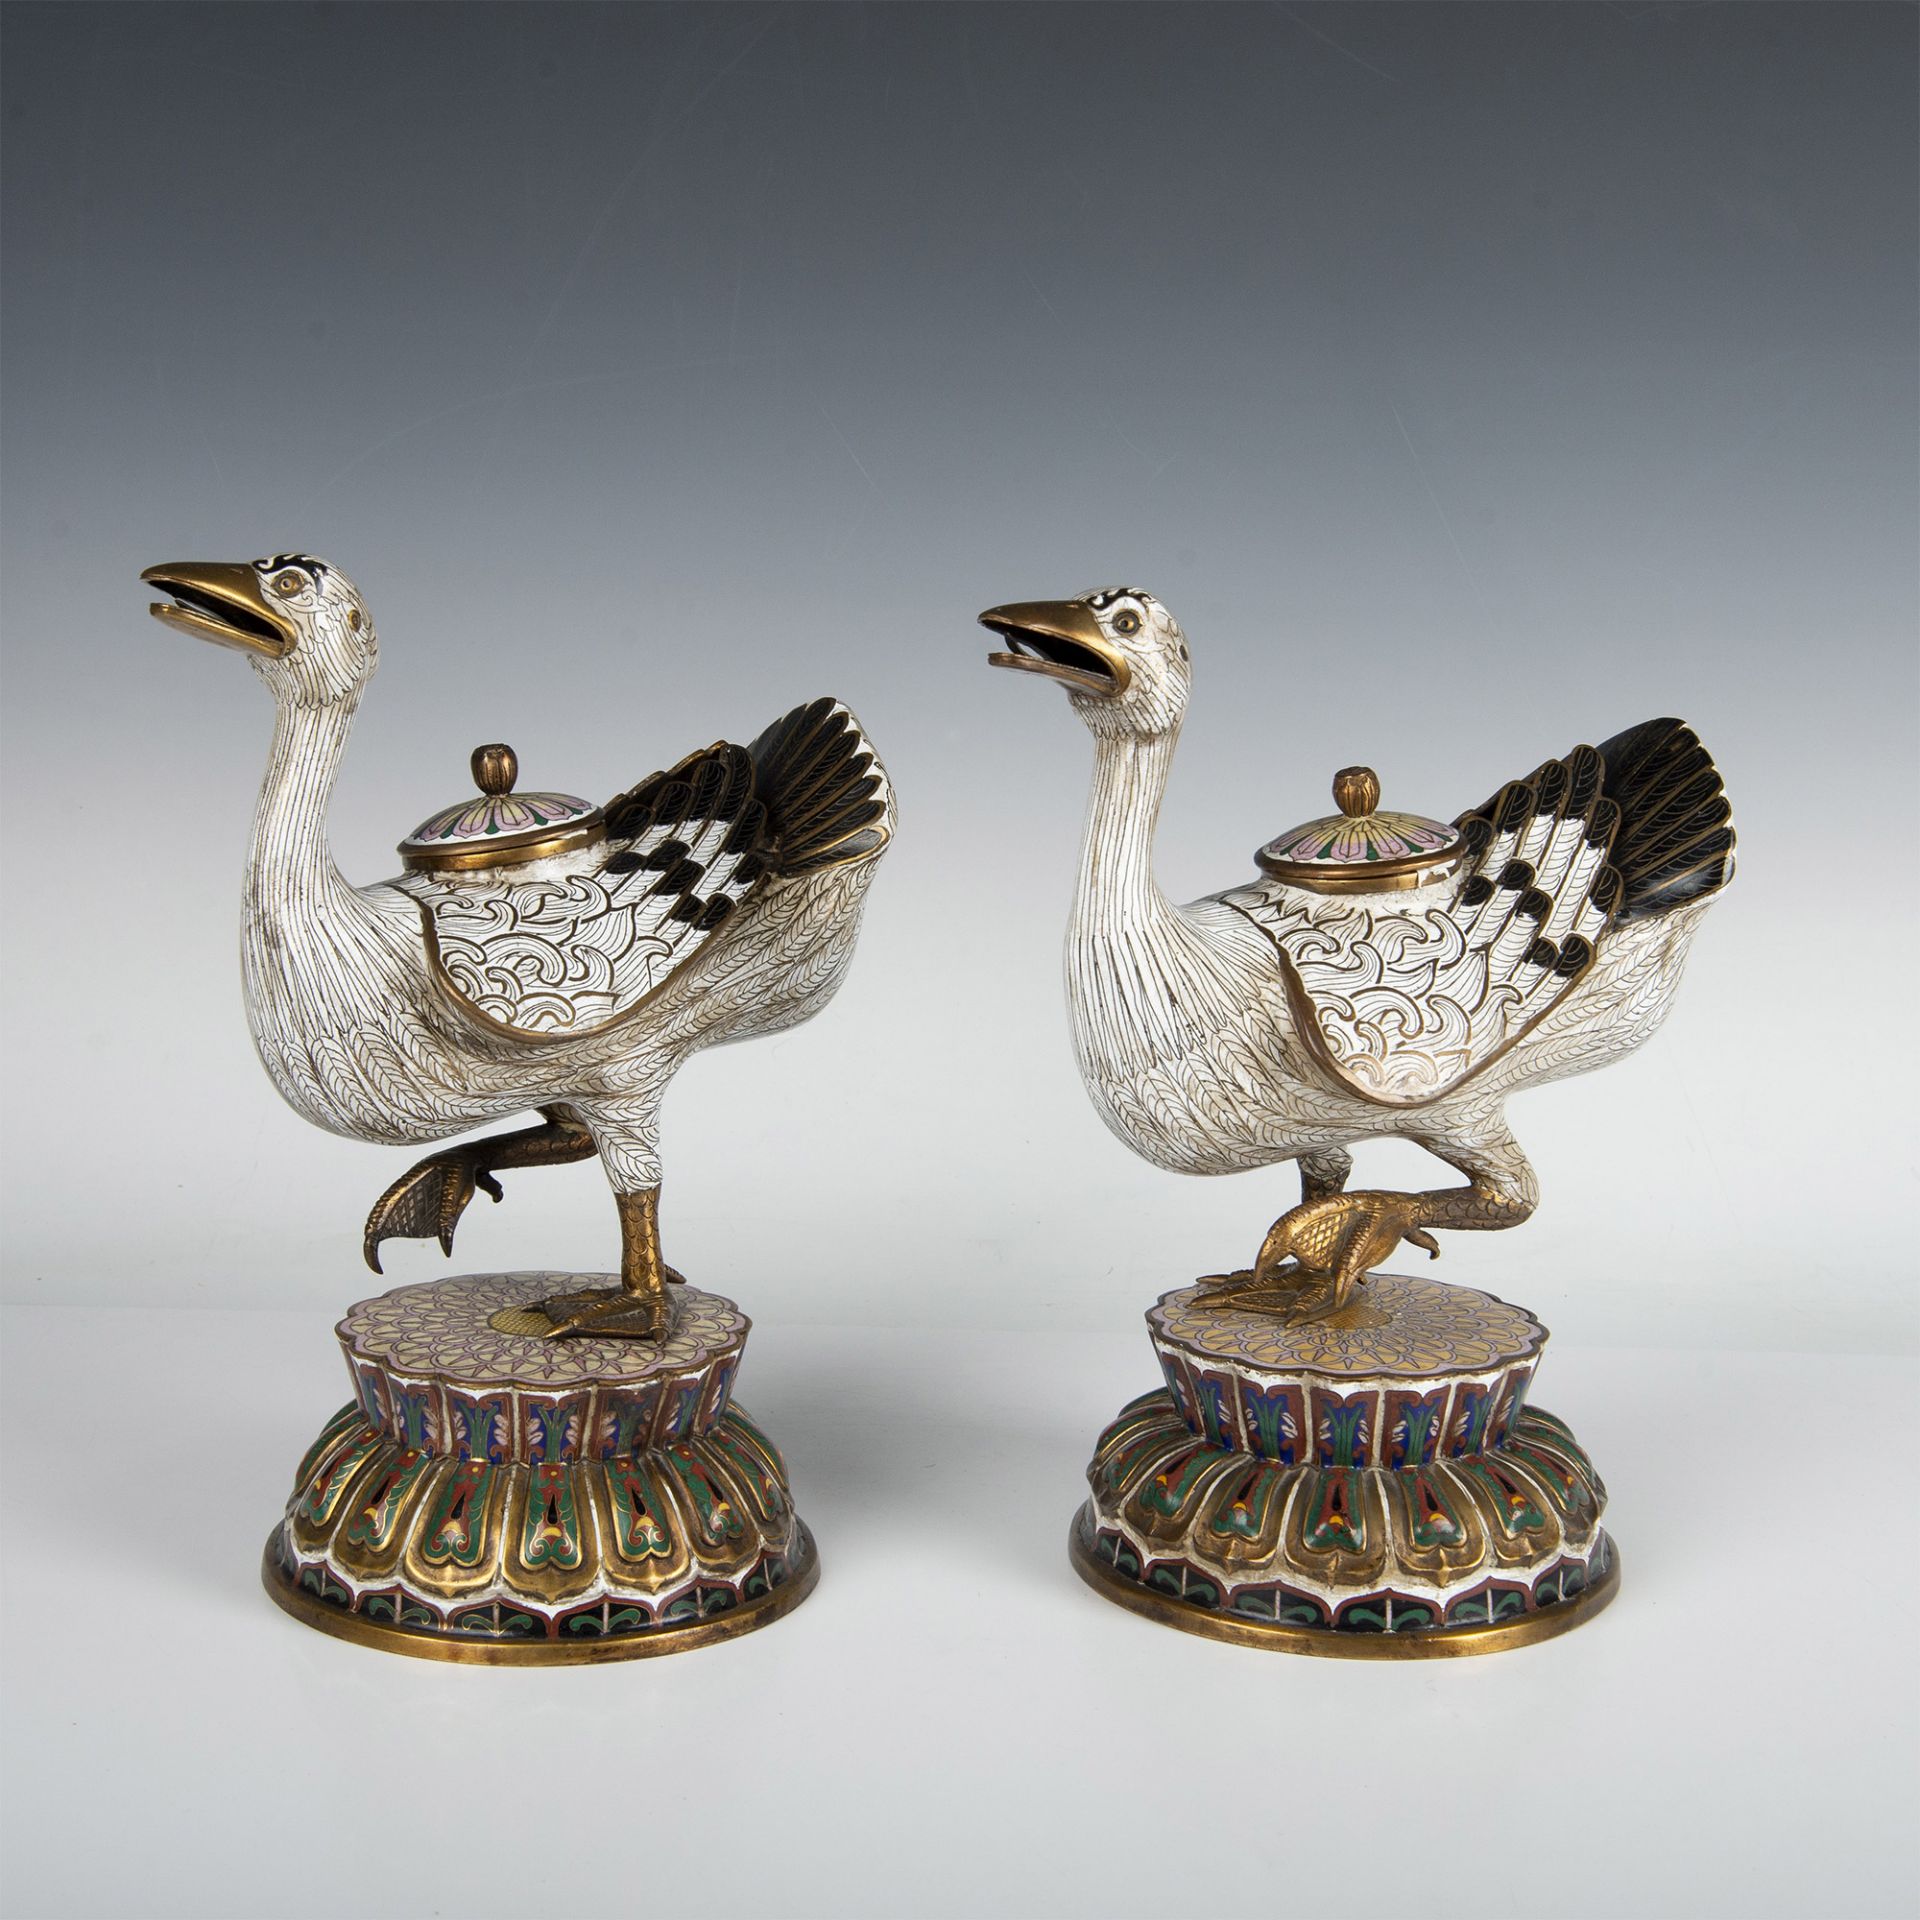 Pair of Chinese Cloisonne Duck Censers